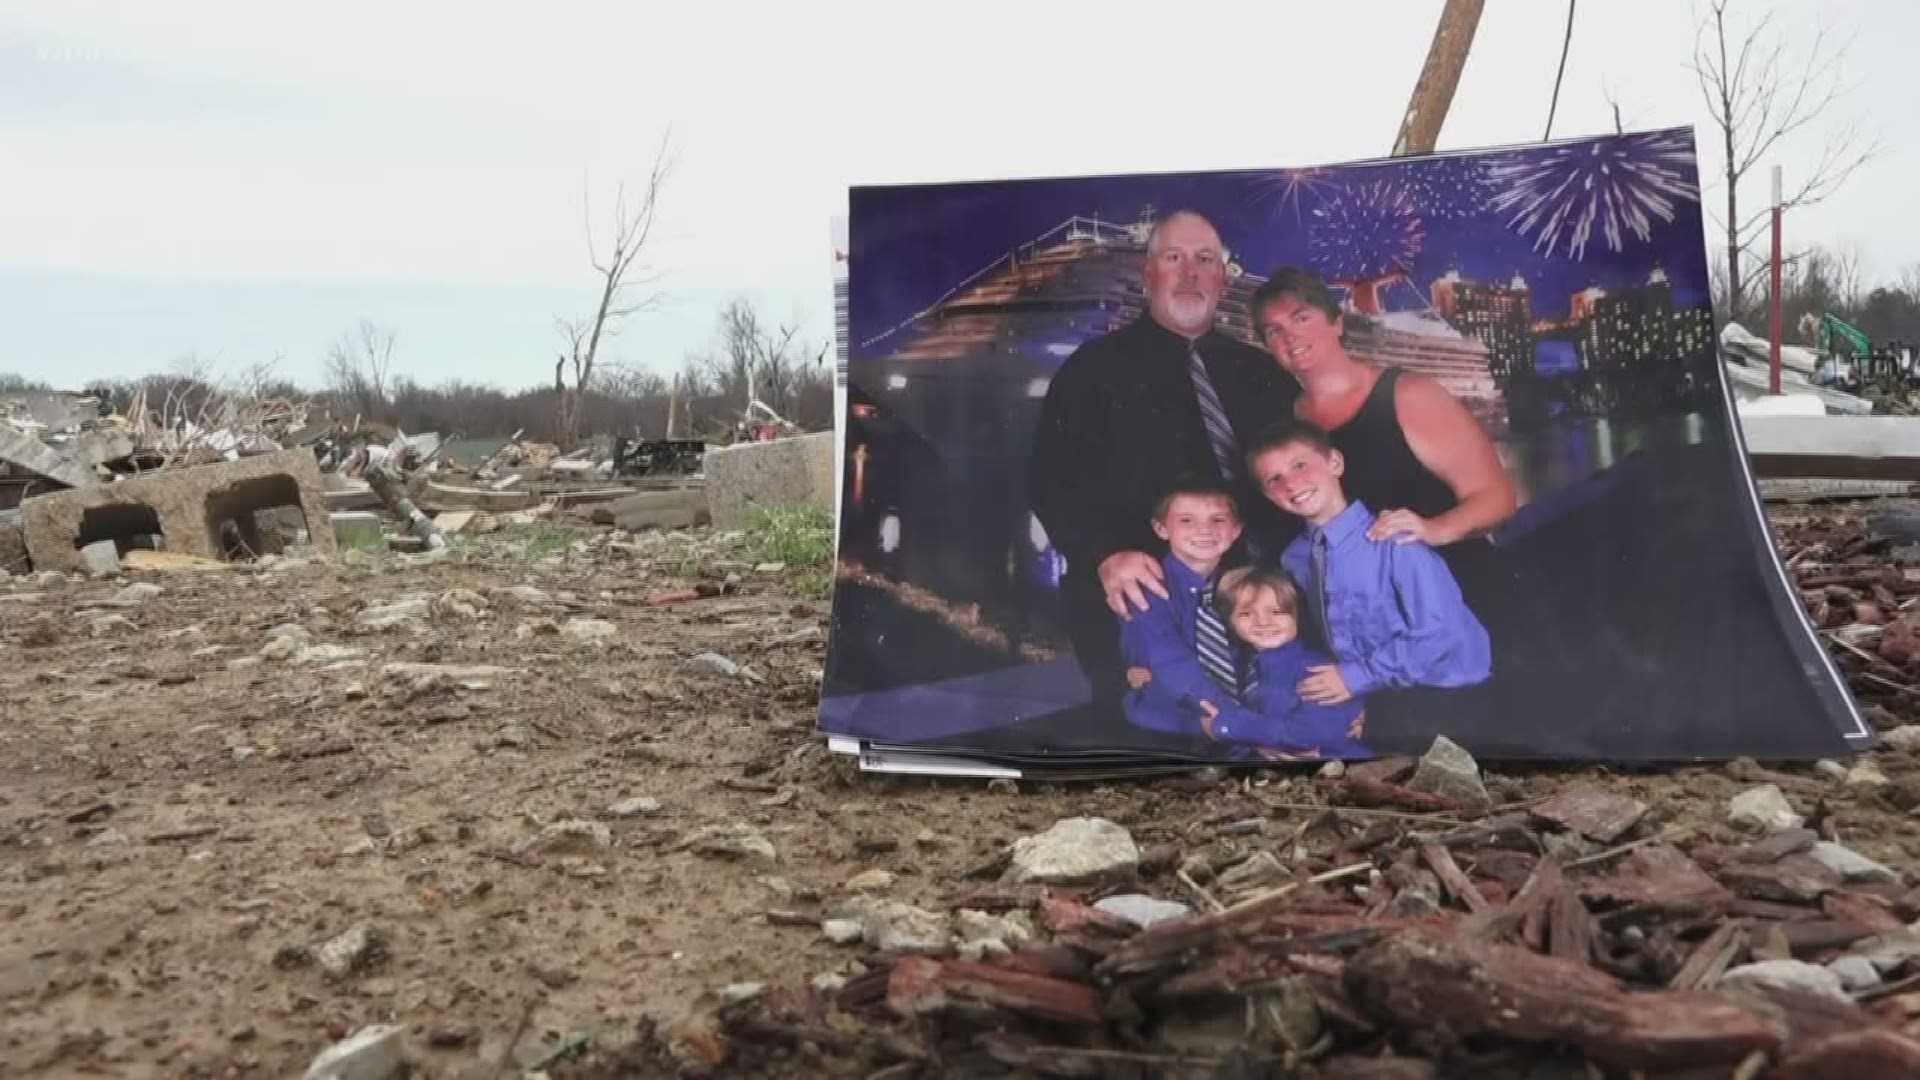 The Curtis family were all asleep in their house when the tornado hit. The mother and one son were the only survivors and are in the hospital.